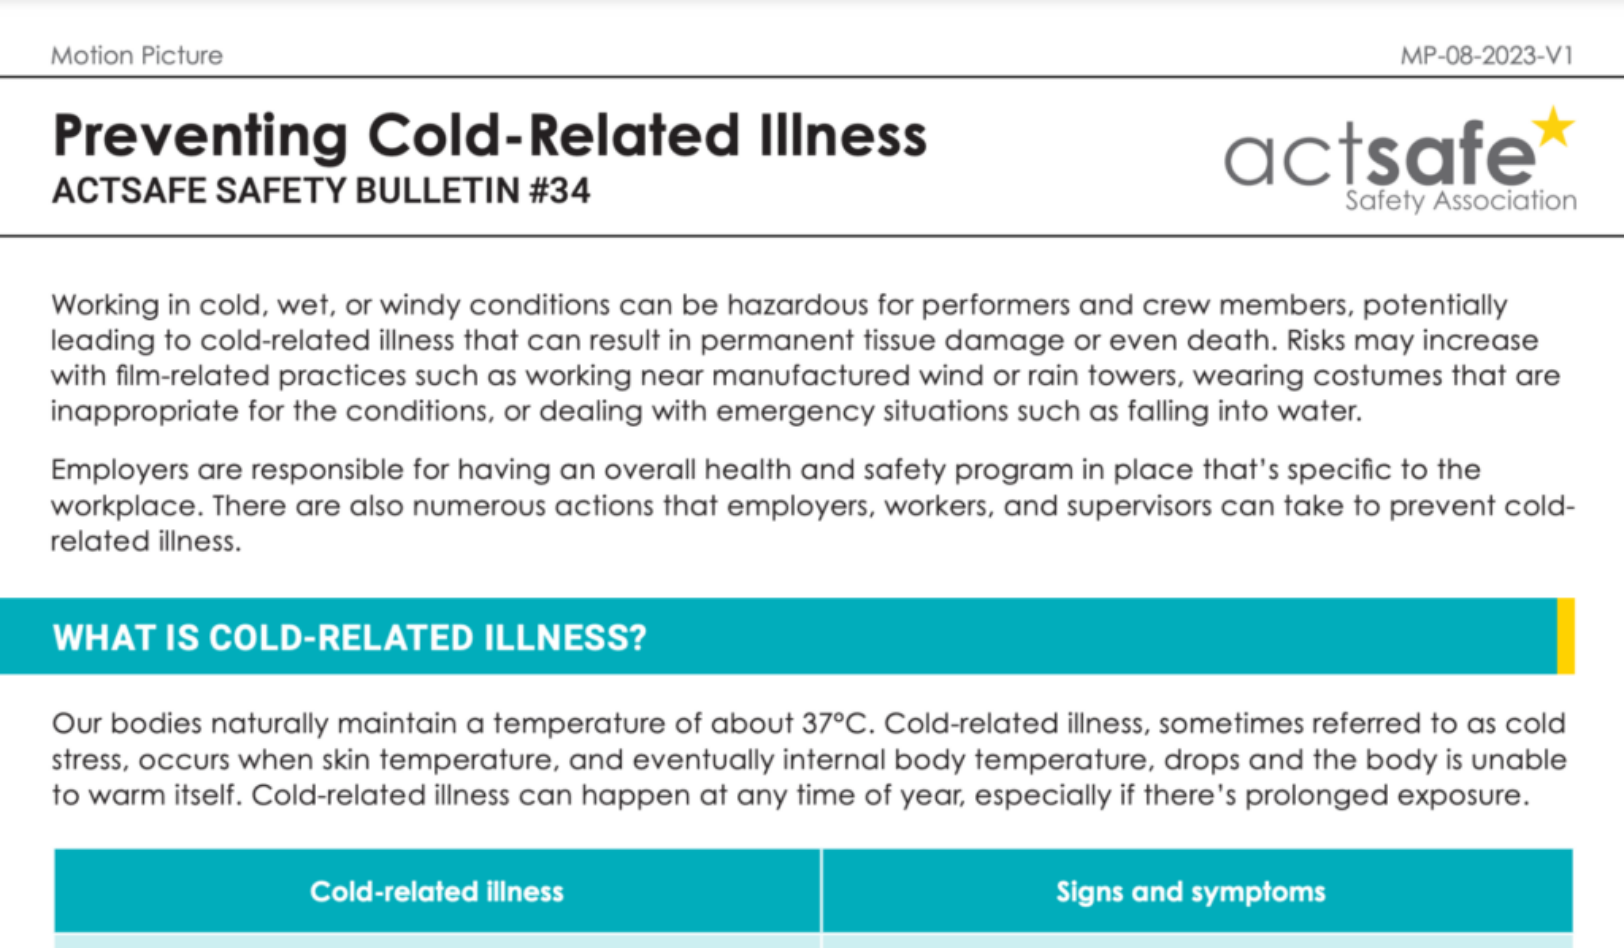 Preventing Cold-Related Illness #34